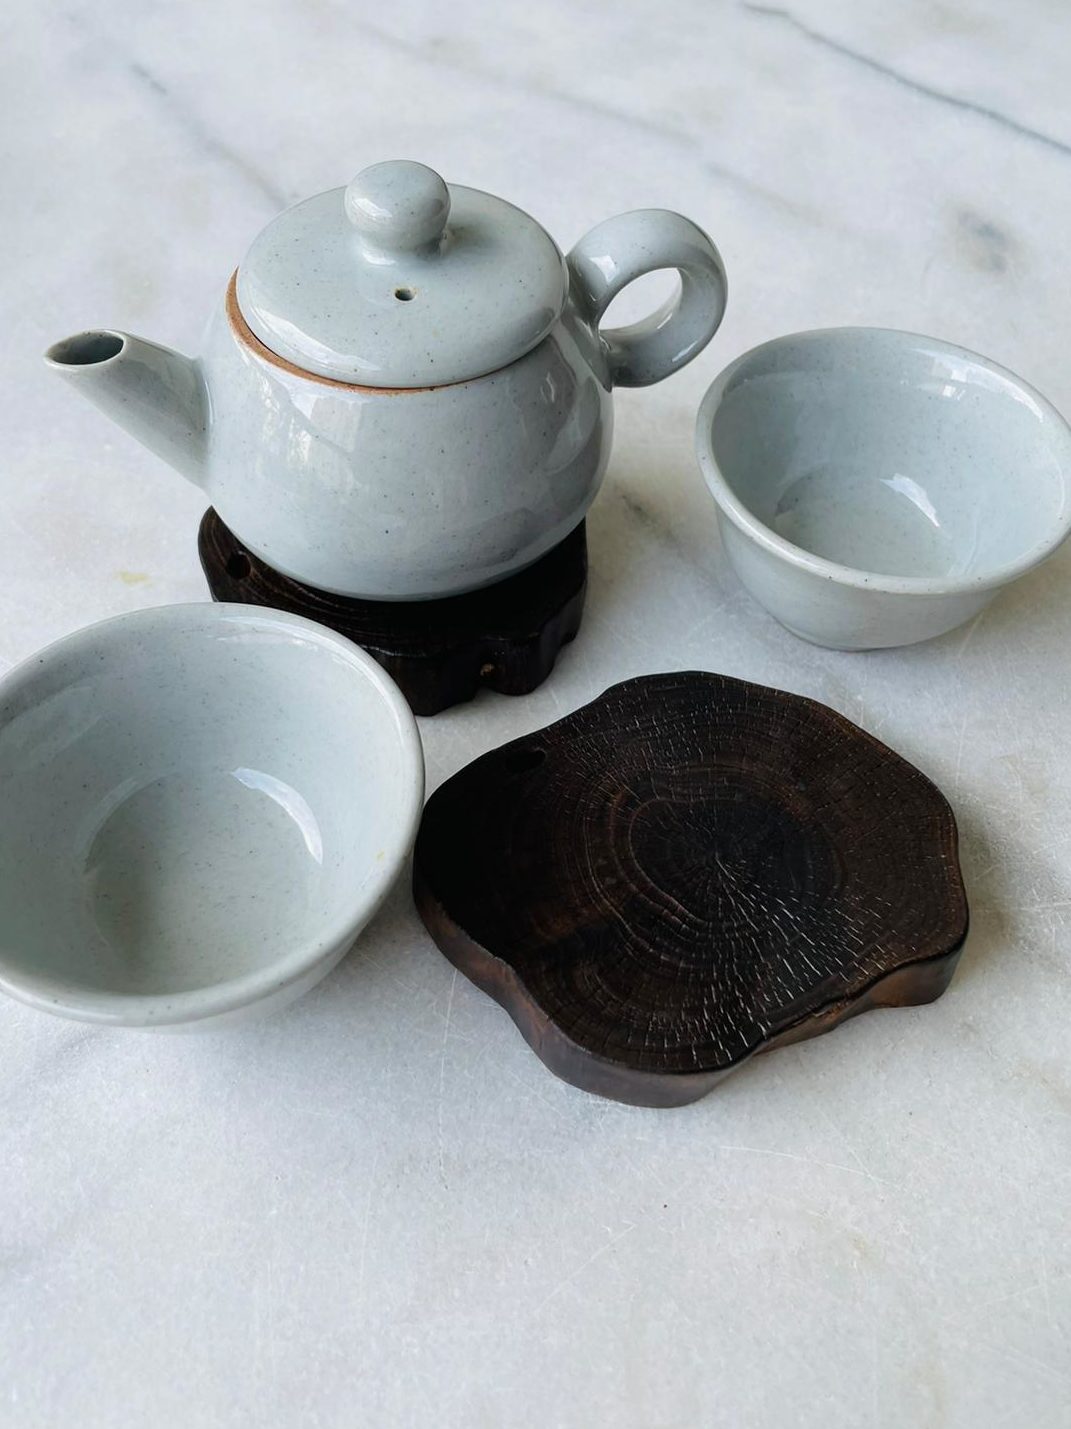 The actual tea set from which the tea was sesrved during the mediation.